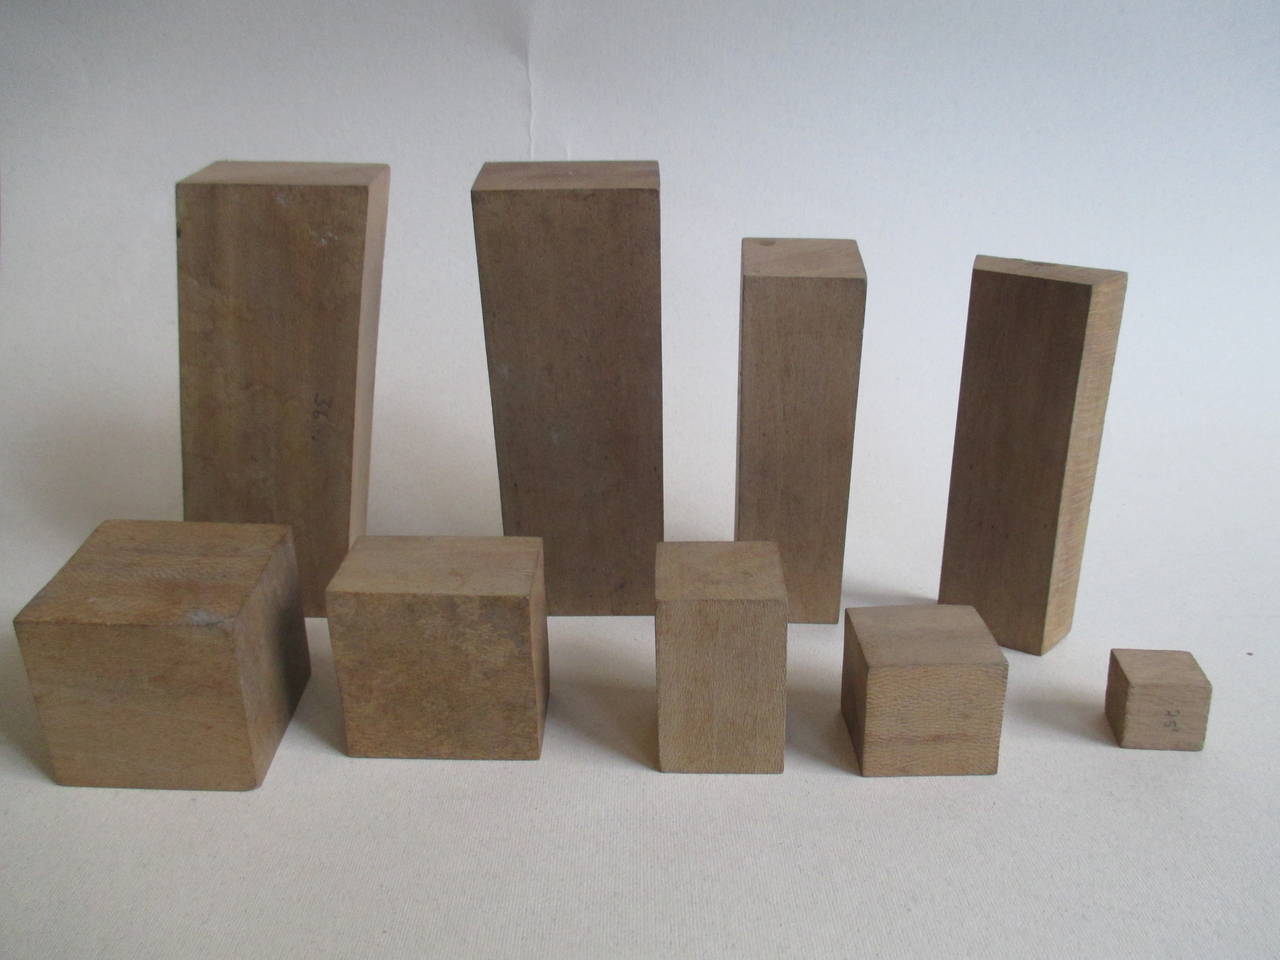 Early 20th Century Geometric Wood Shapes with Original Box by Faustino Palluzie, 1920s